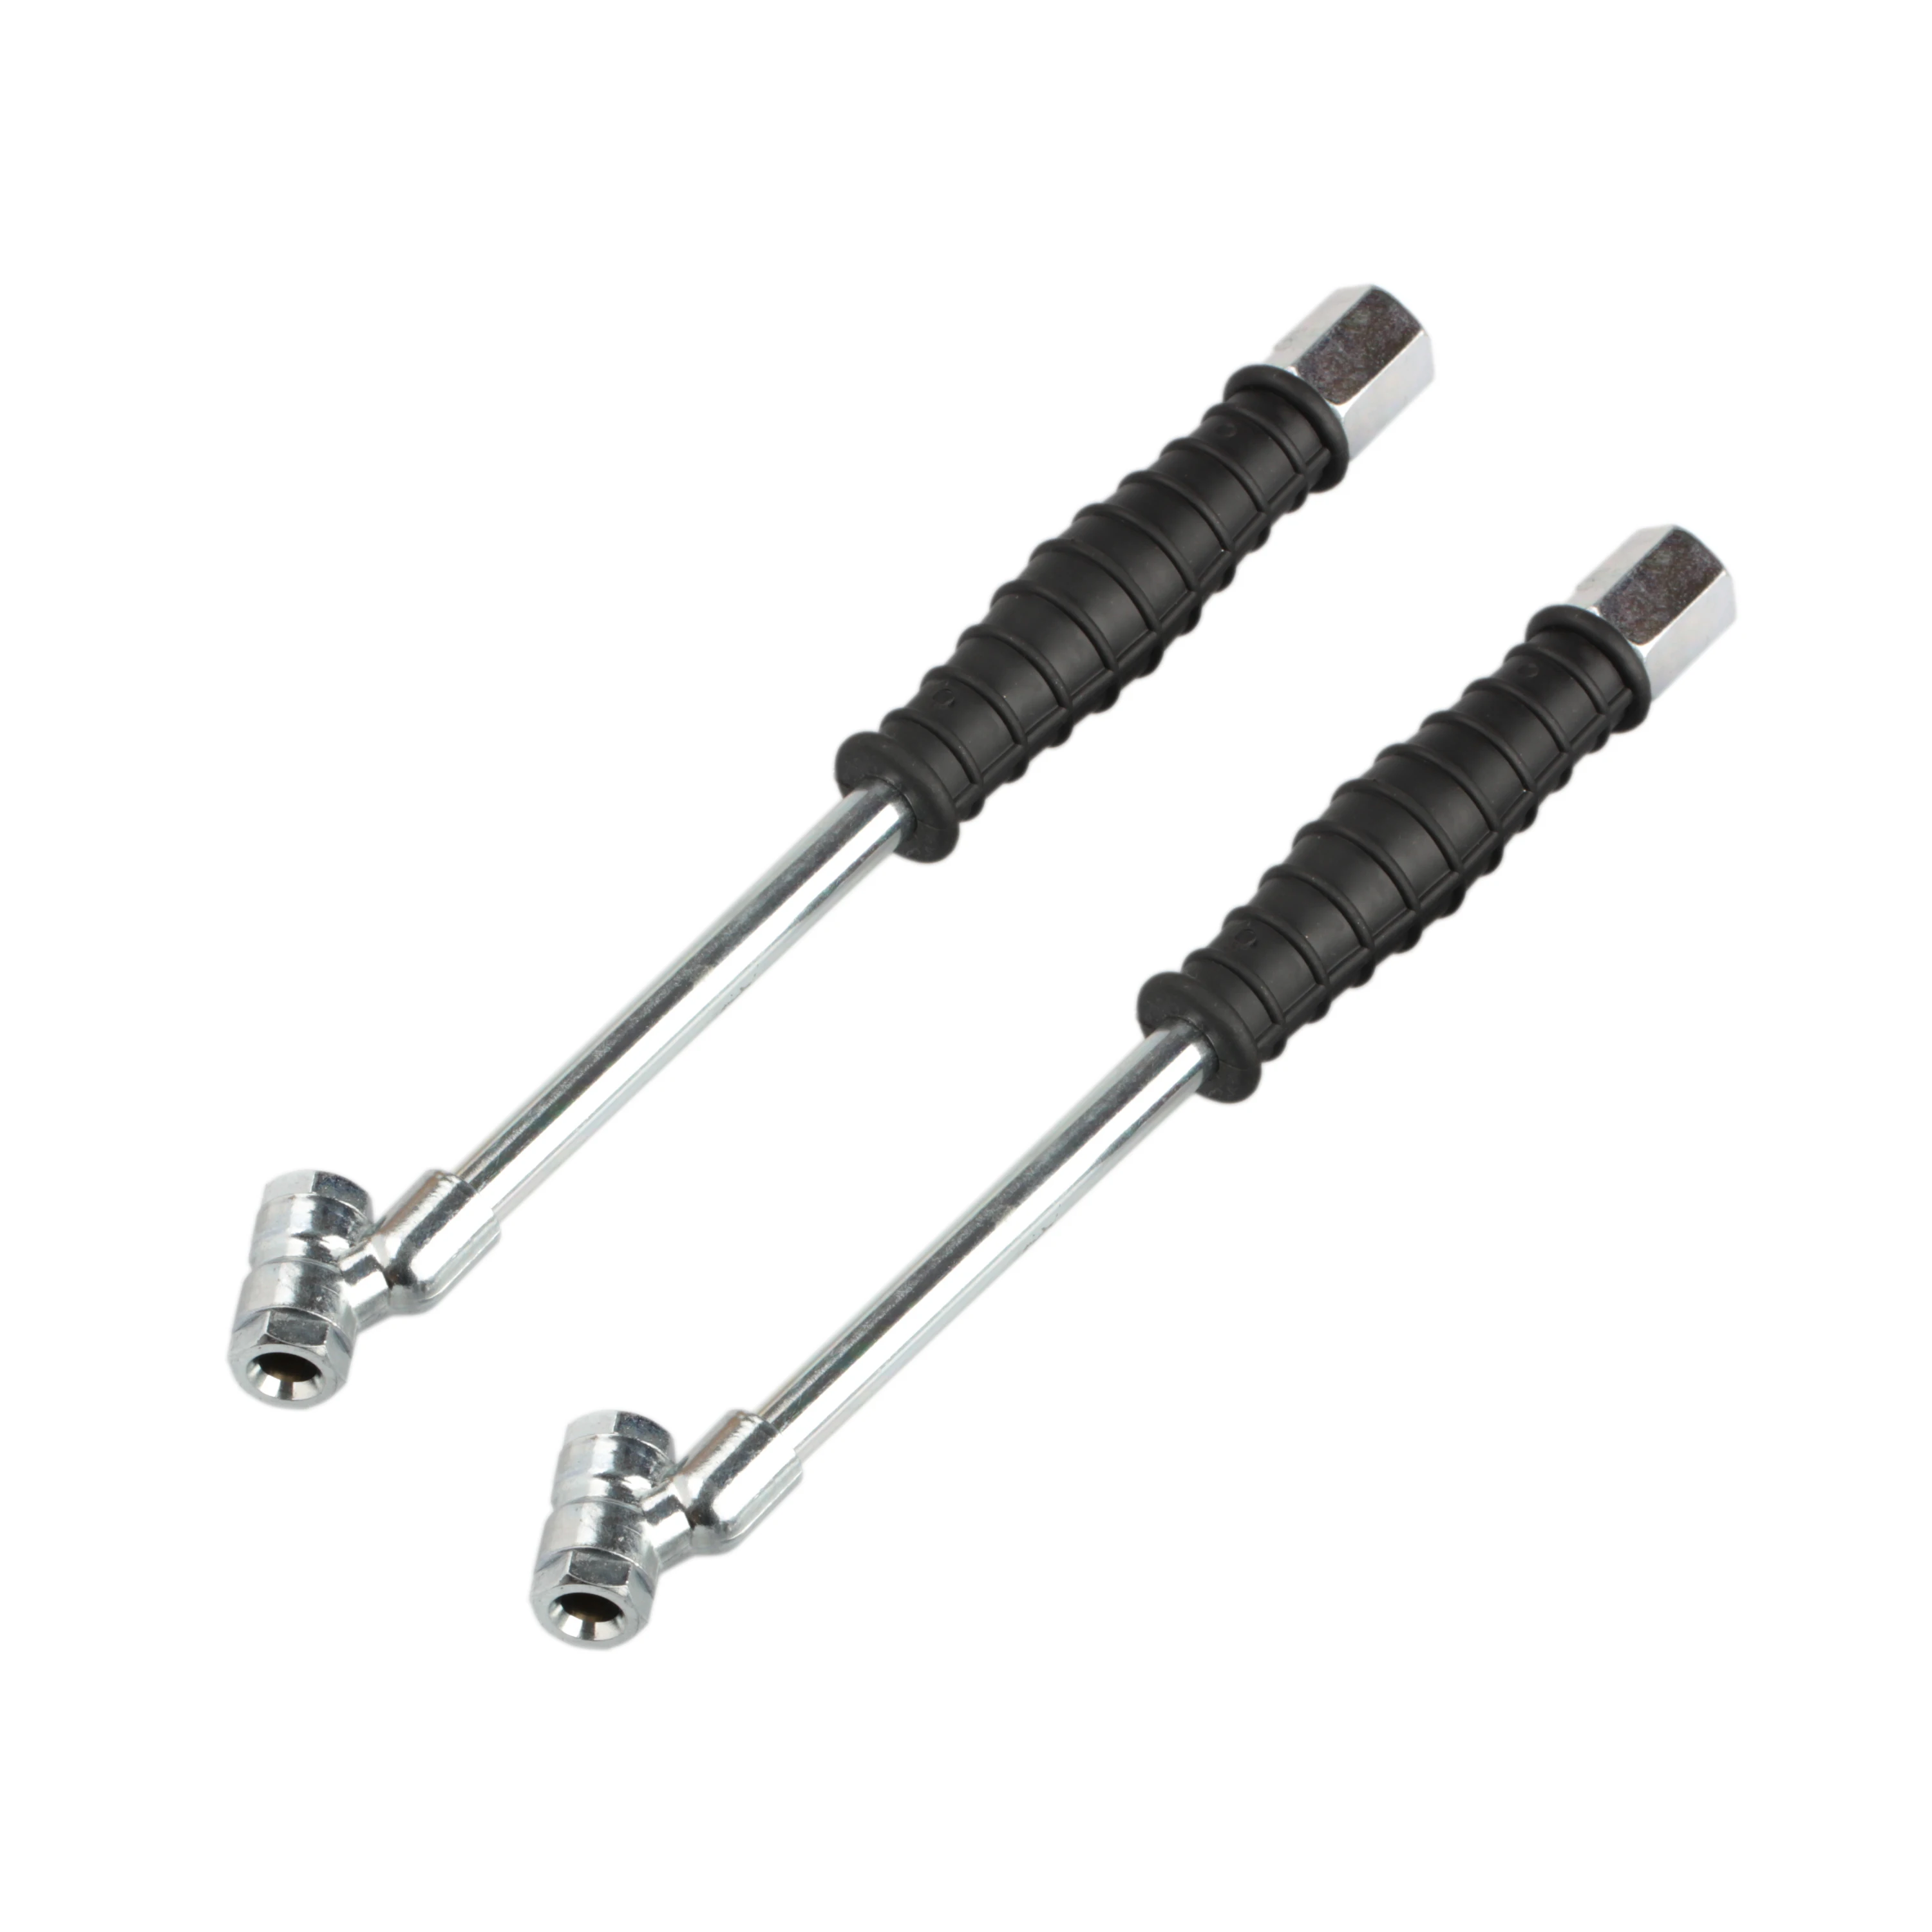 2PACK, Close NAWTOR 2 Pack Open Flow Straight Lock-On Air Chuck with Clip for Tire Inflator 